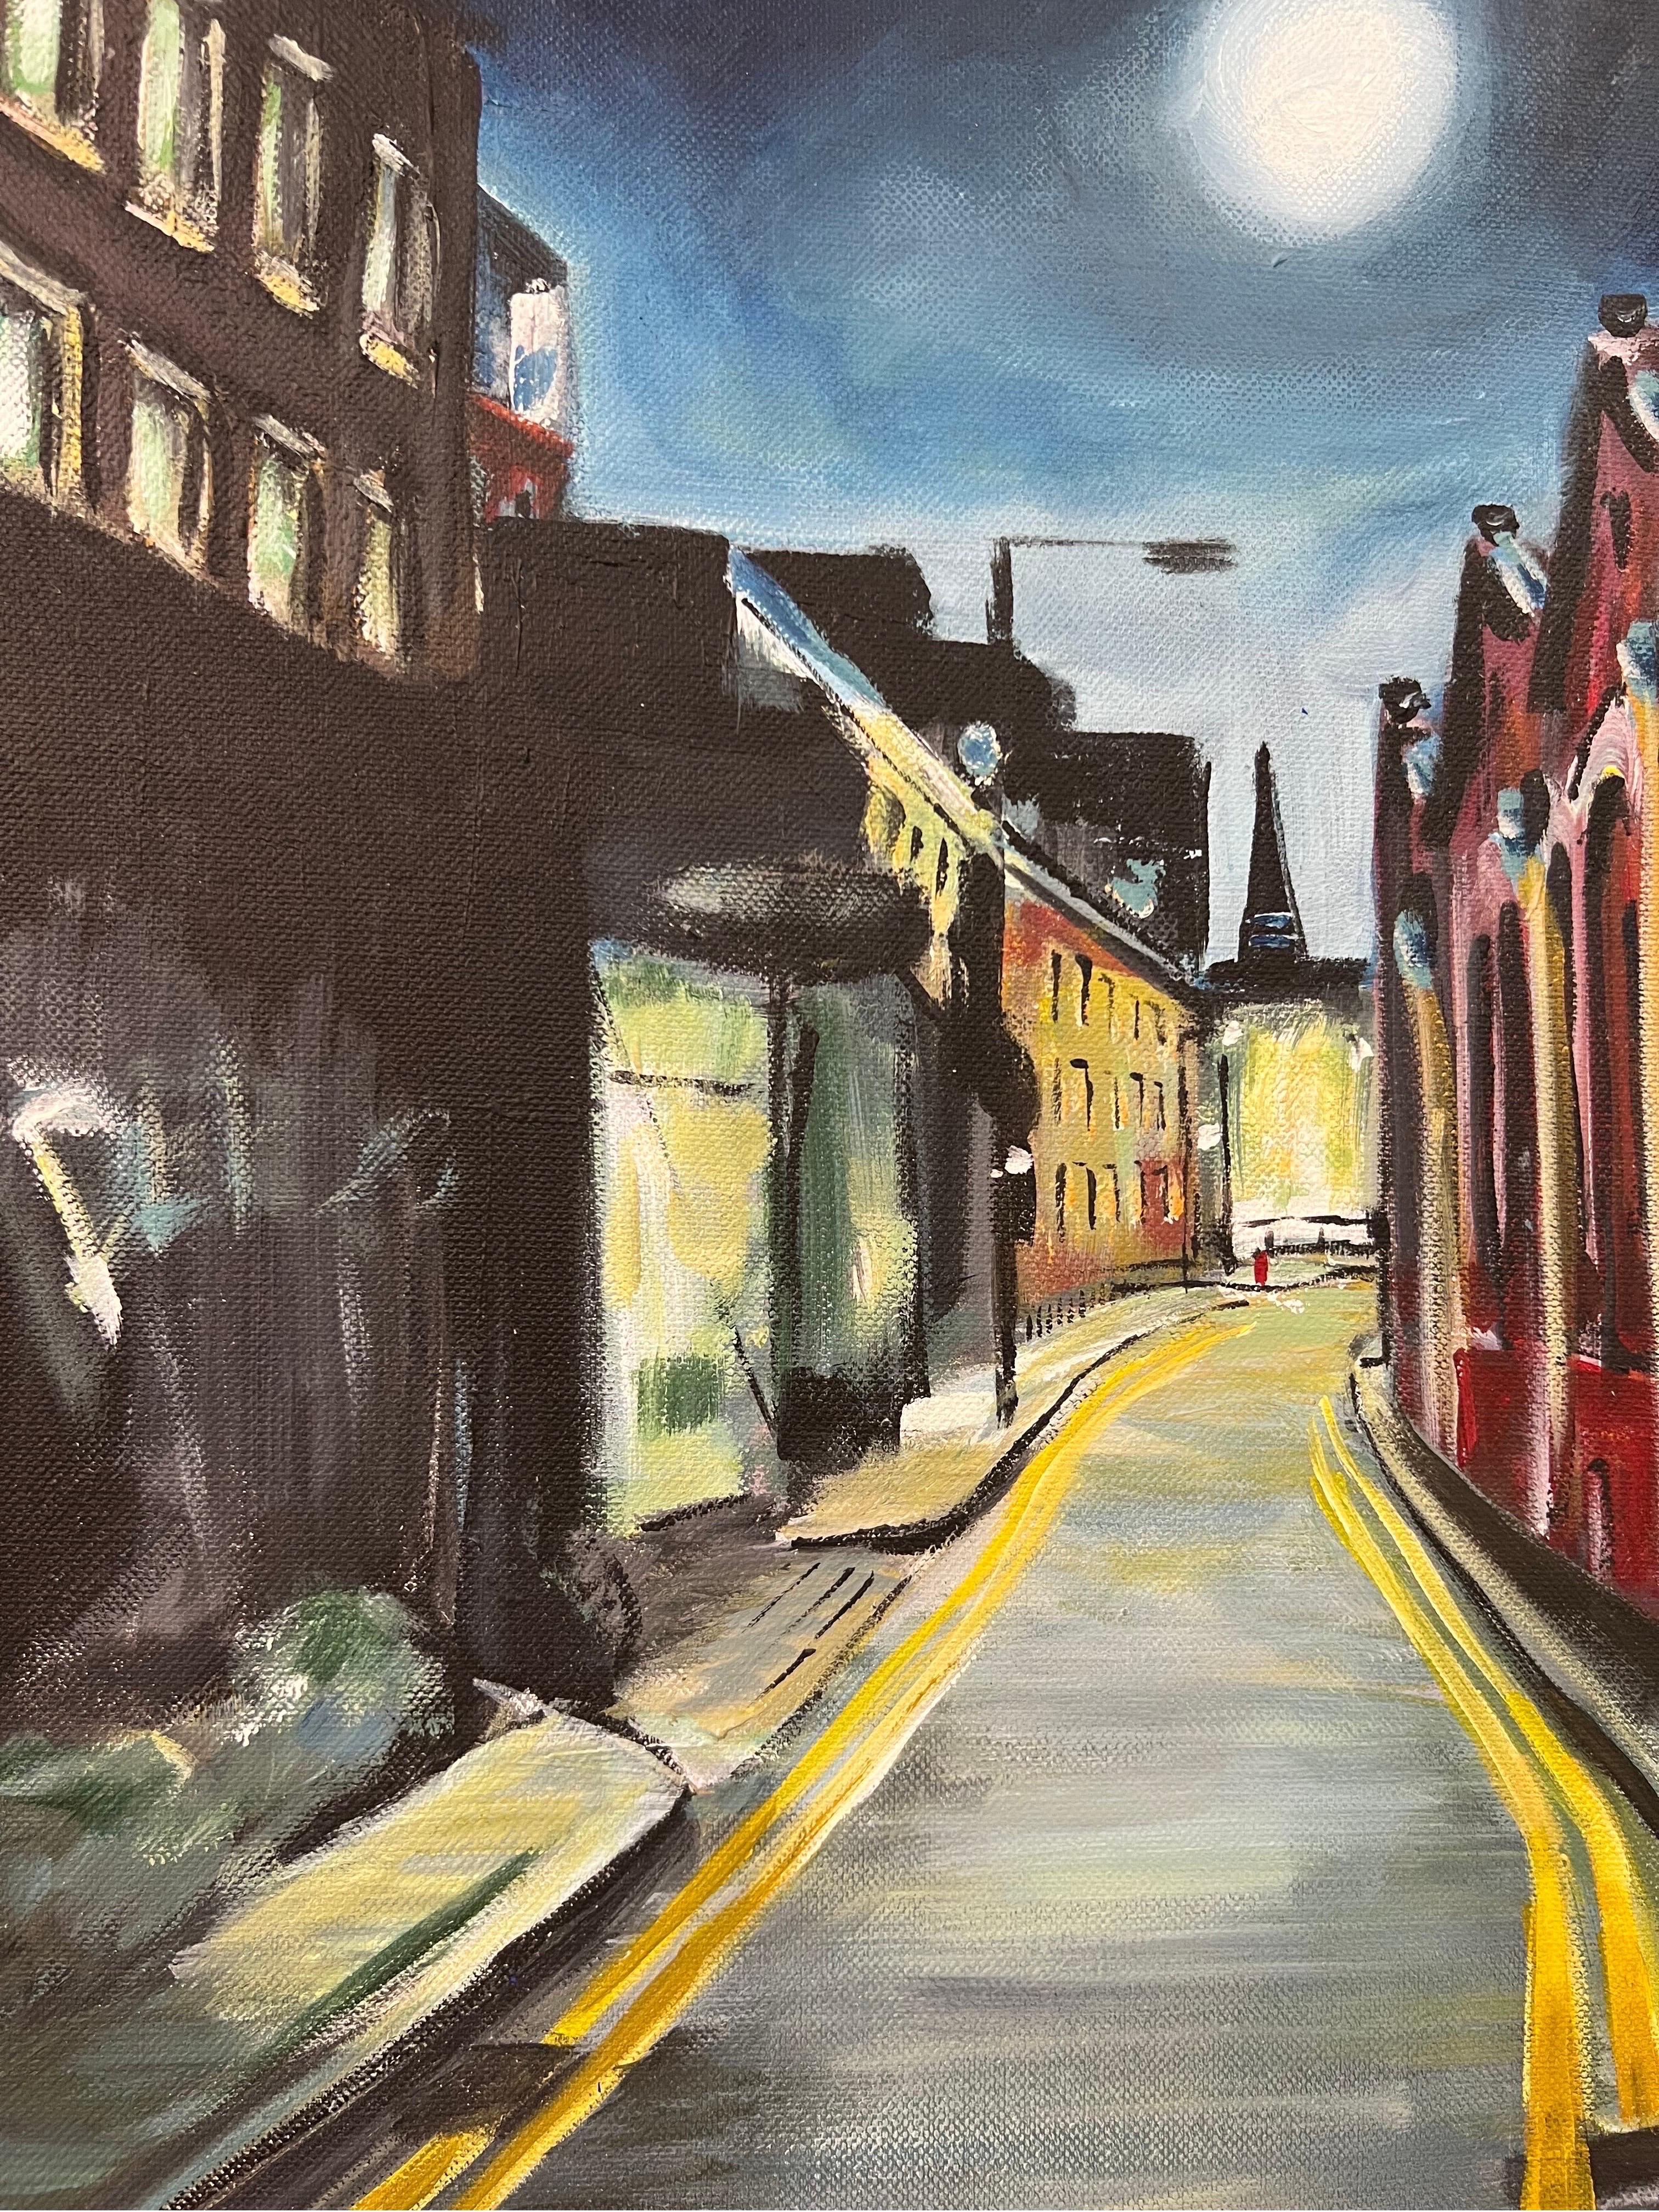 Atmospheric Painting of Street in Whitechapel London City by British Artist For Sale 7